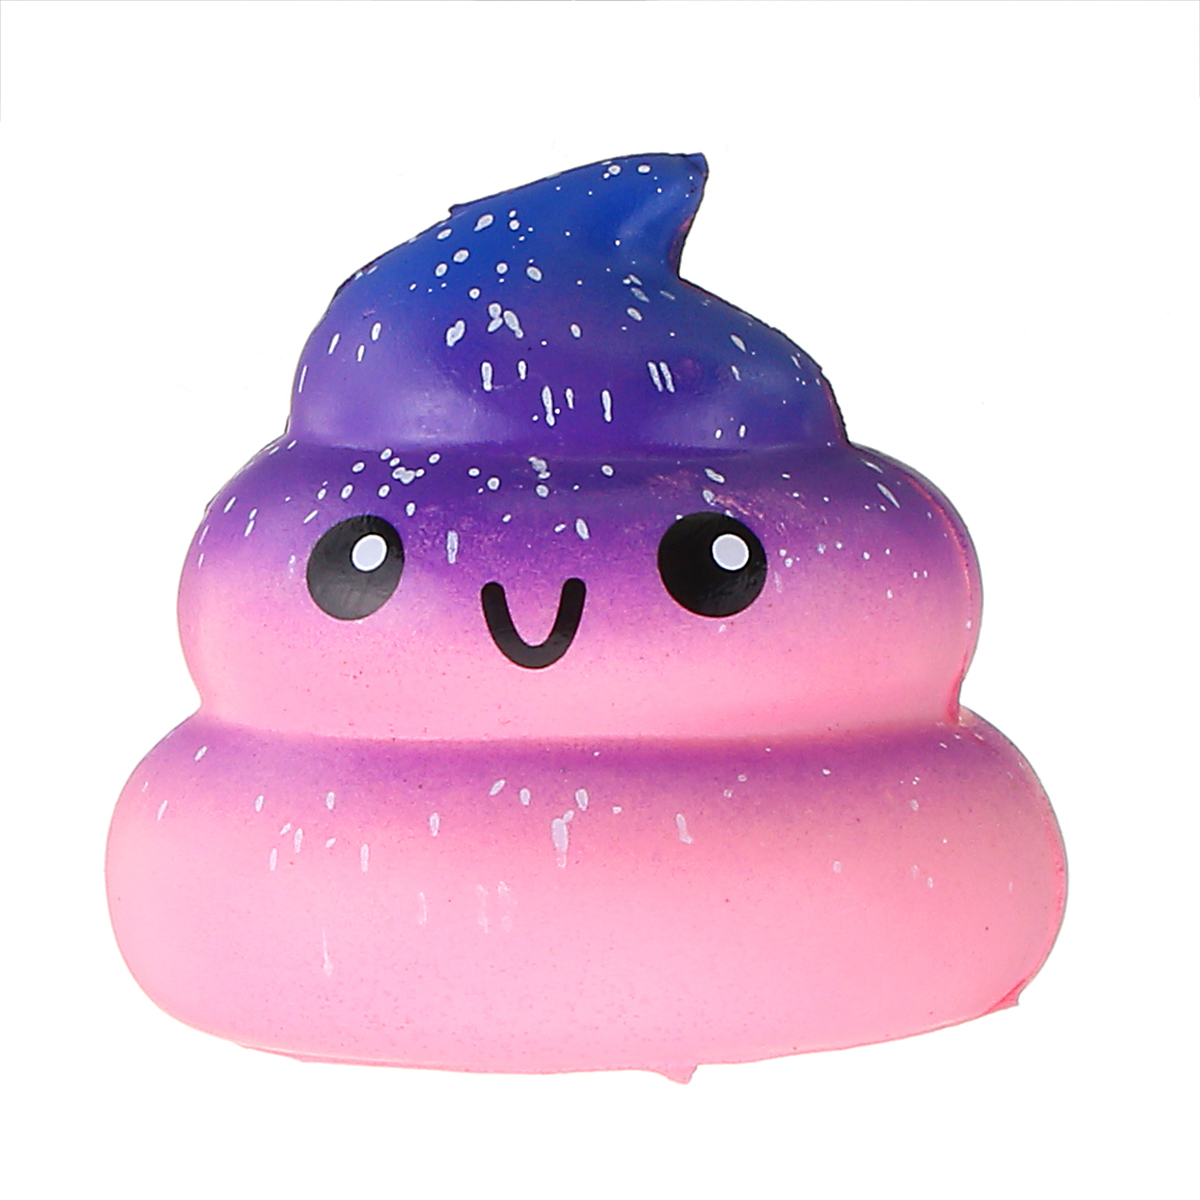 Squishy-Galaxy-Poo-Squishy-Hand-Pillow-65CM-Slow-Rising-With-Packaging-Collection-Gift-Decor-Toy-1311228-5